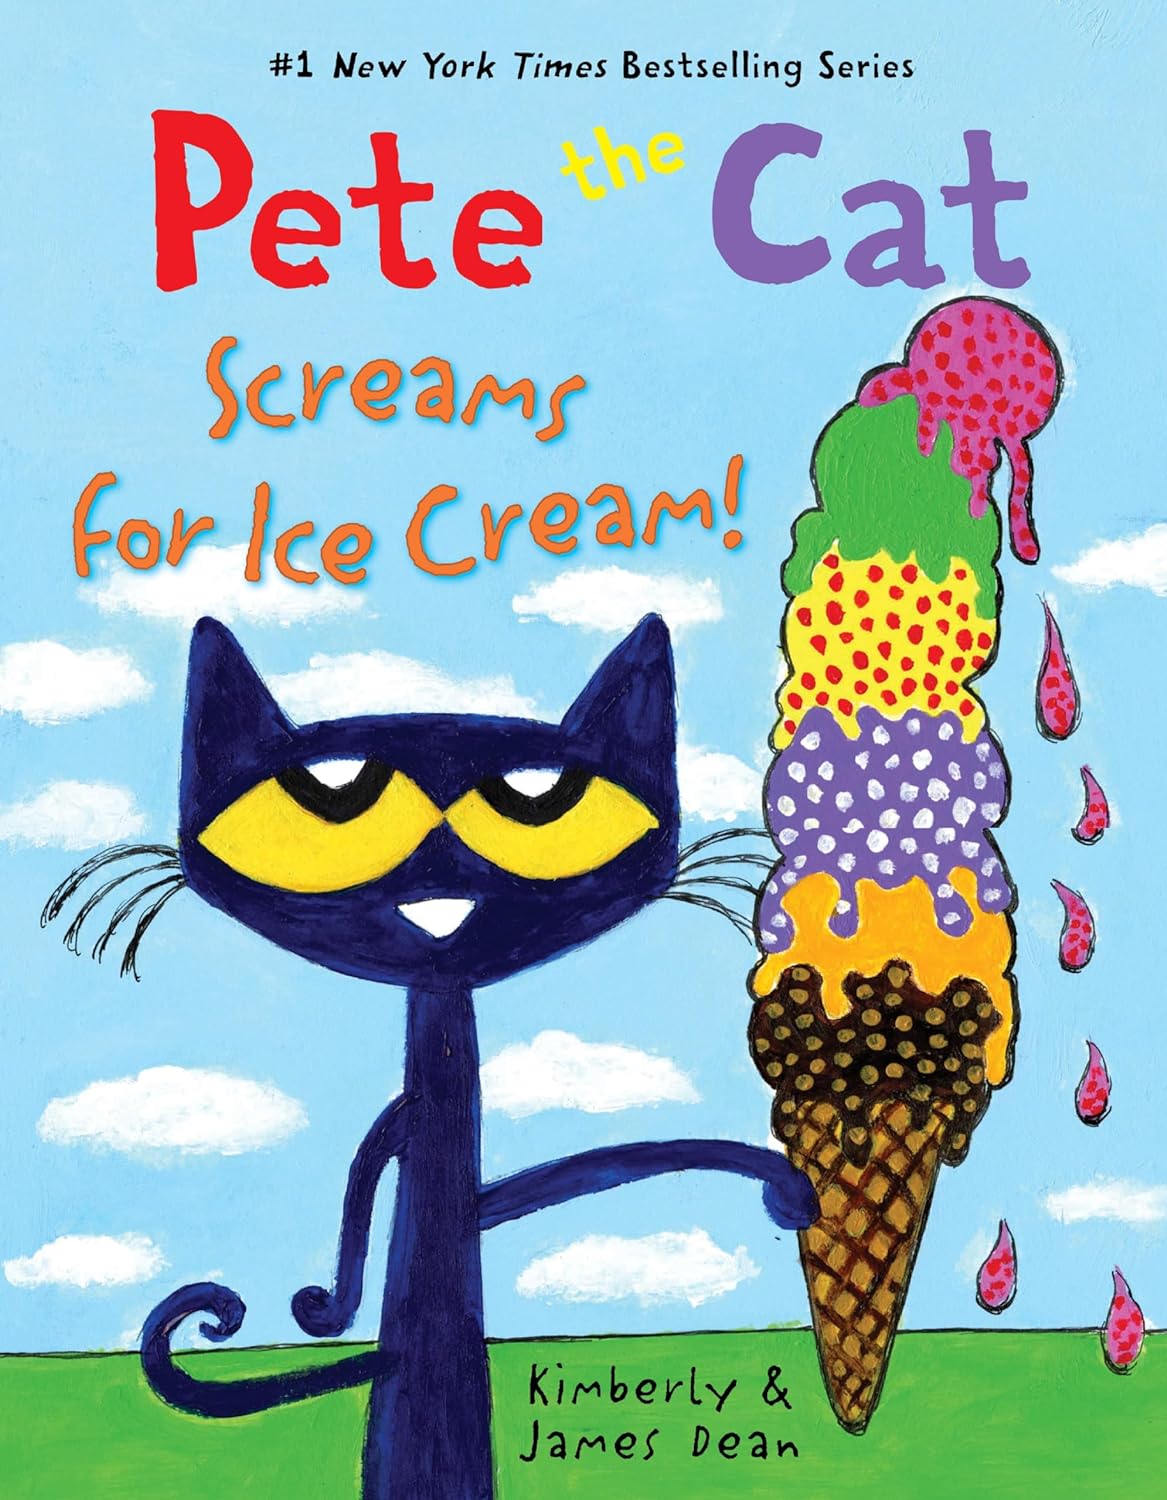 Pete the Cat Screams for Ice Cream by Kimberly Dean